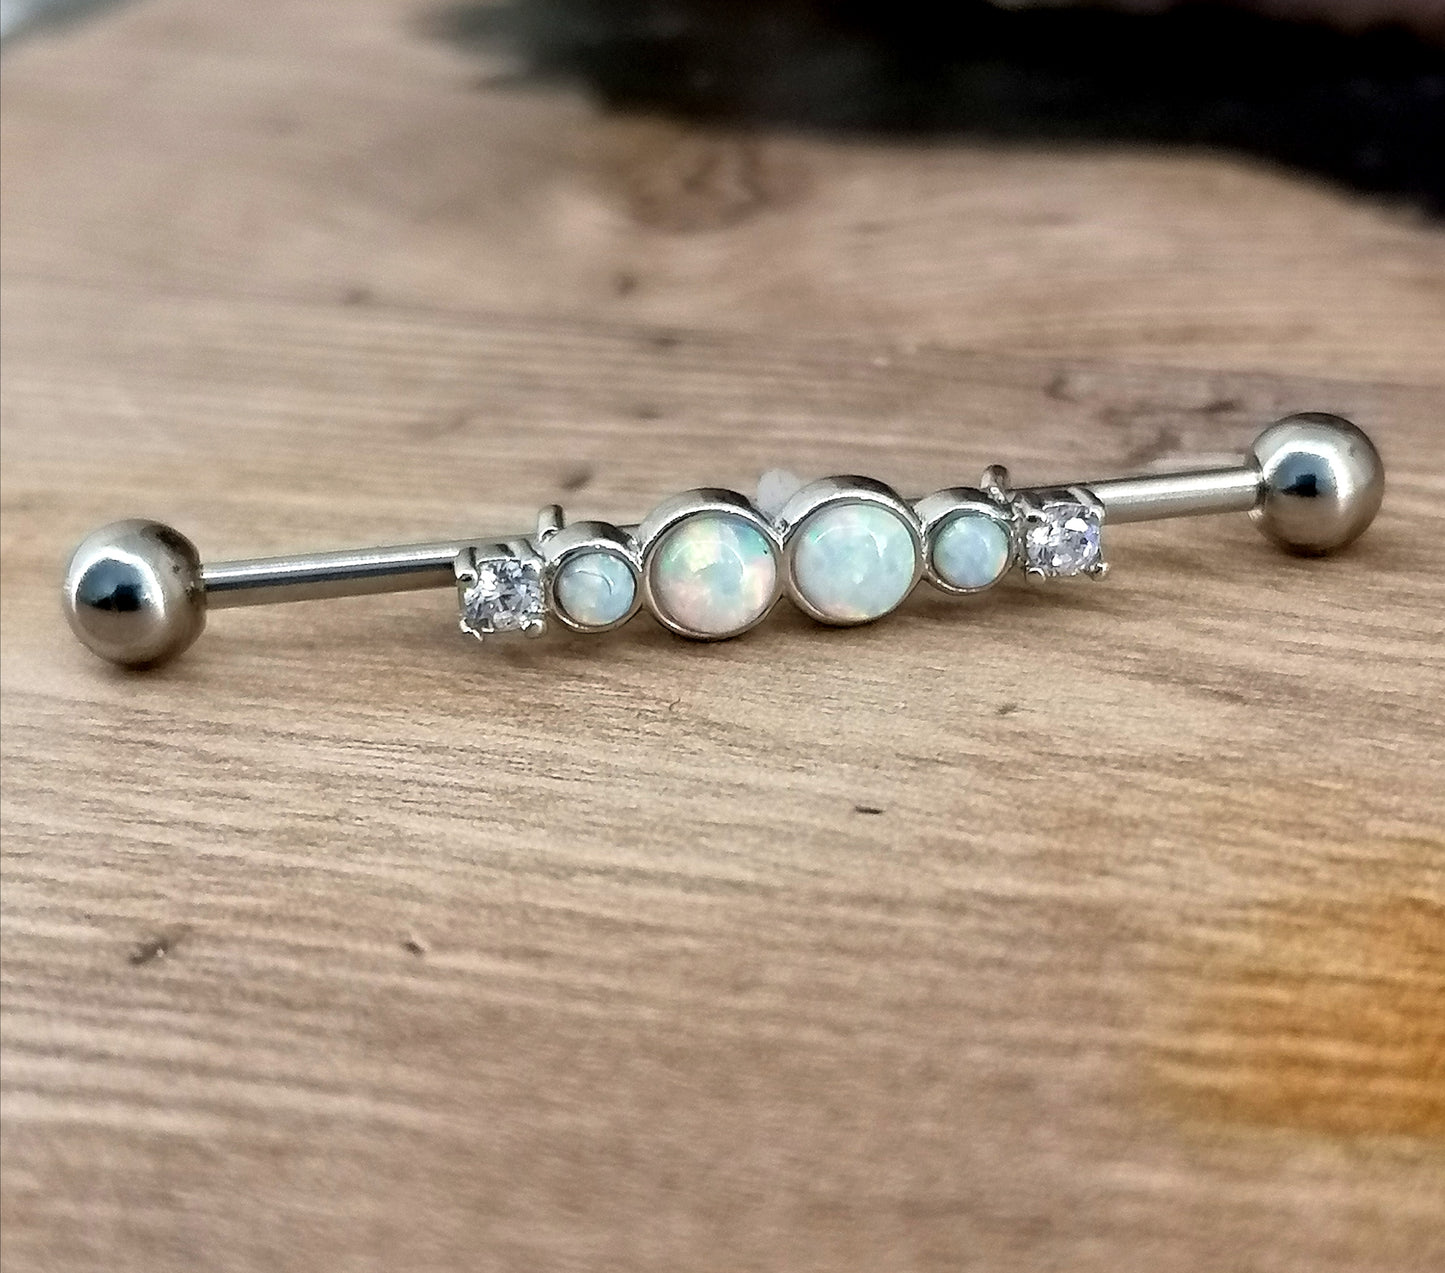 Surgical Steel Industrial / Scaffold Opal Style with Gem Barbell